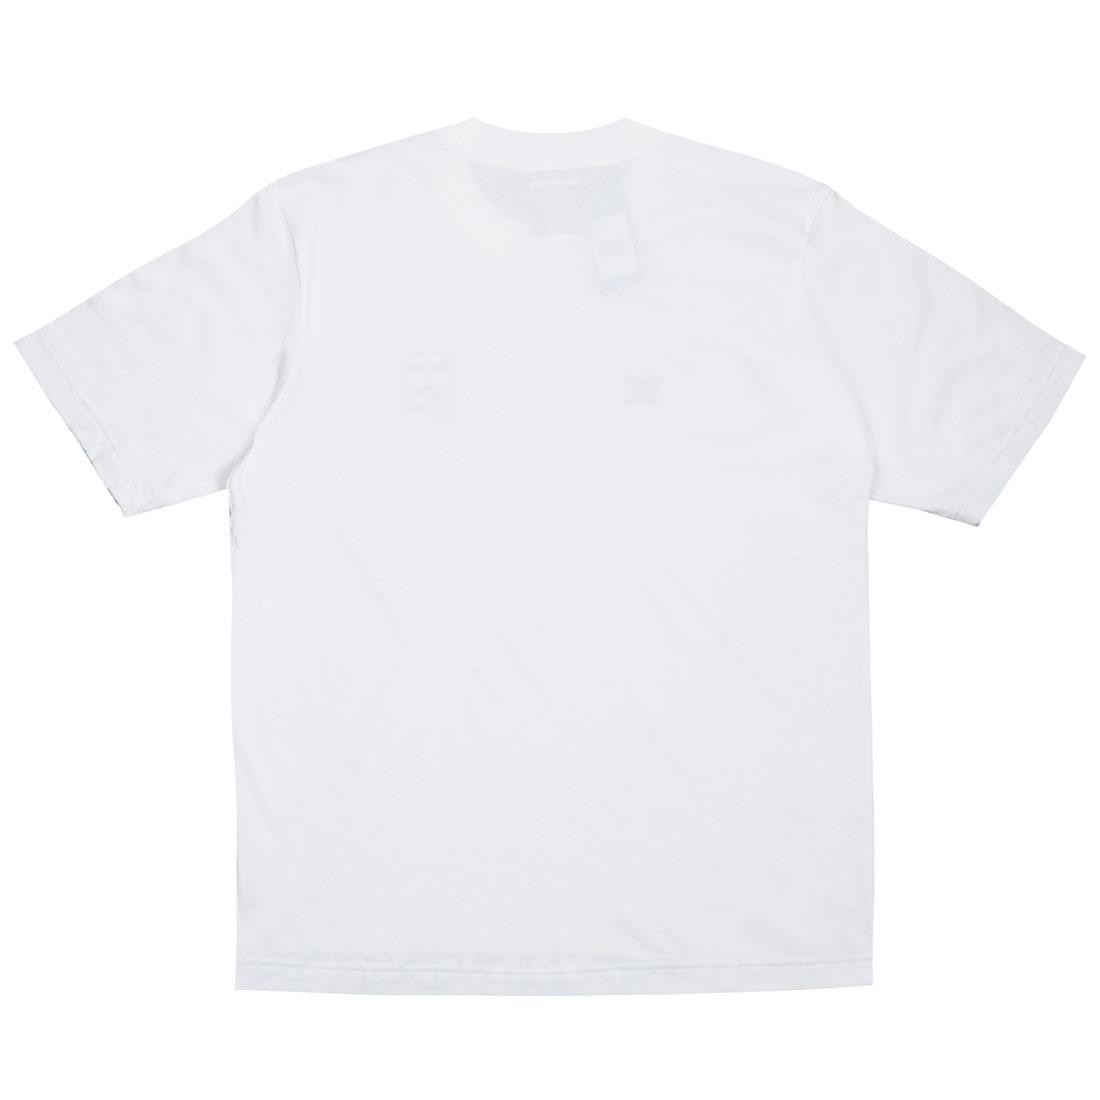 Adidas x Have A Good Time Men HAGT T-Shirt white